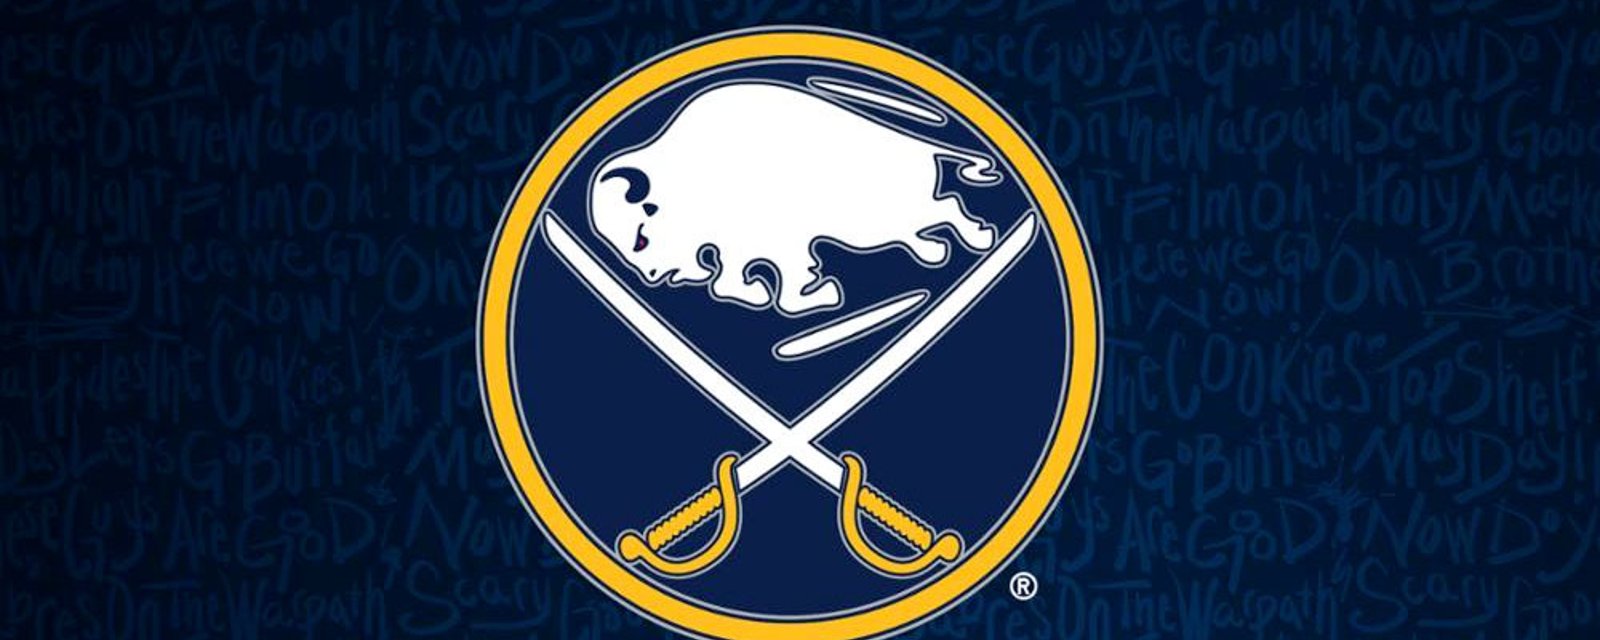 Sabres officially announce new jerseys and uniforms